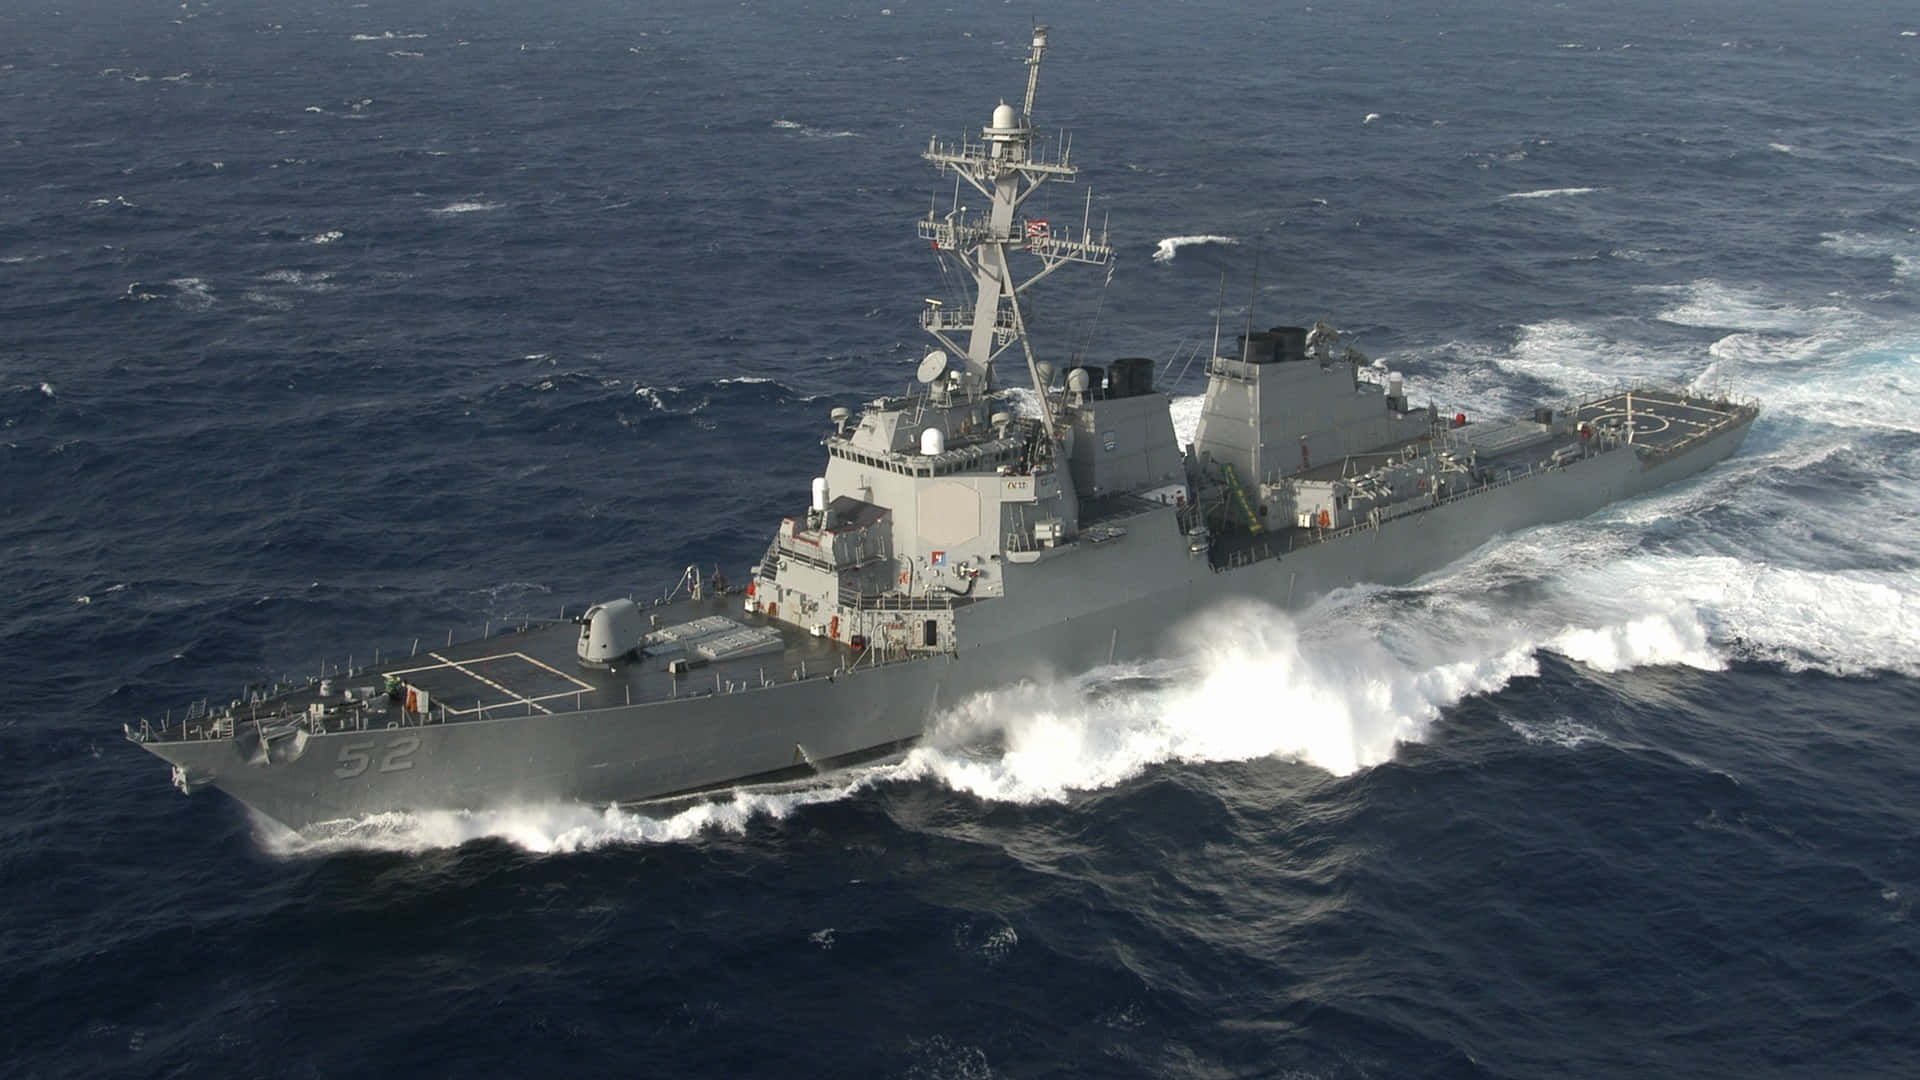 A Navy Ship Is Traveling In The Ocean